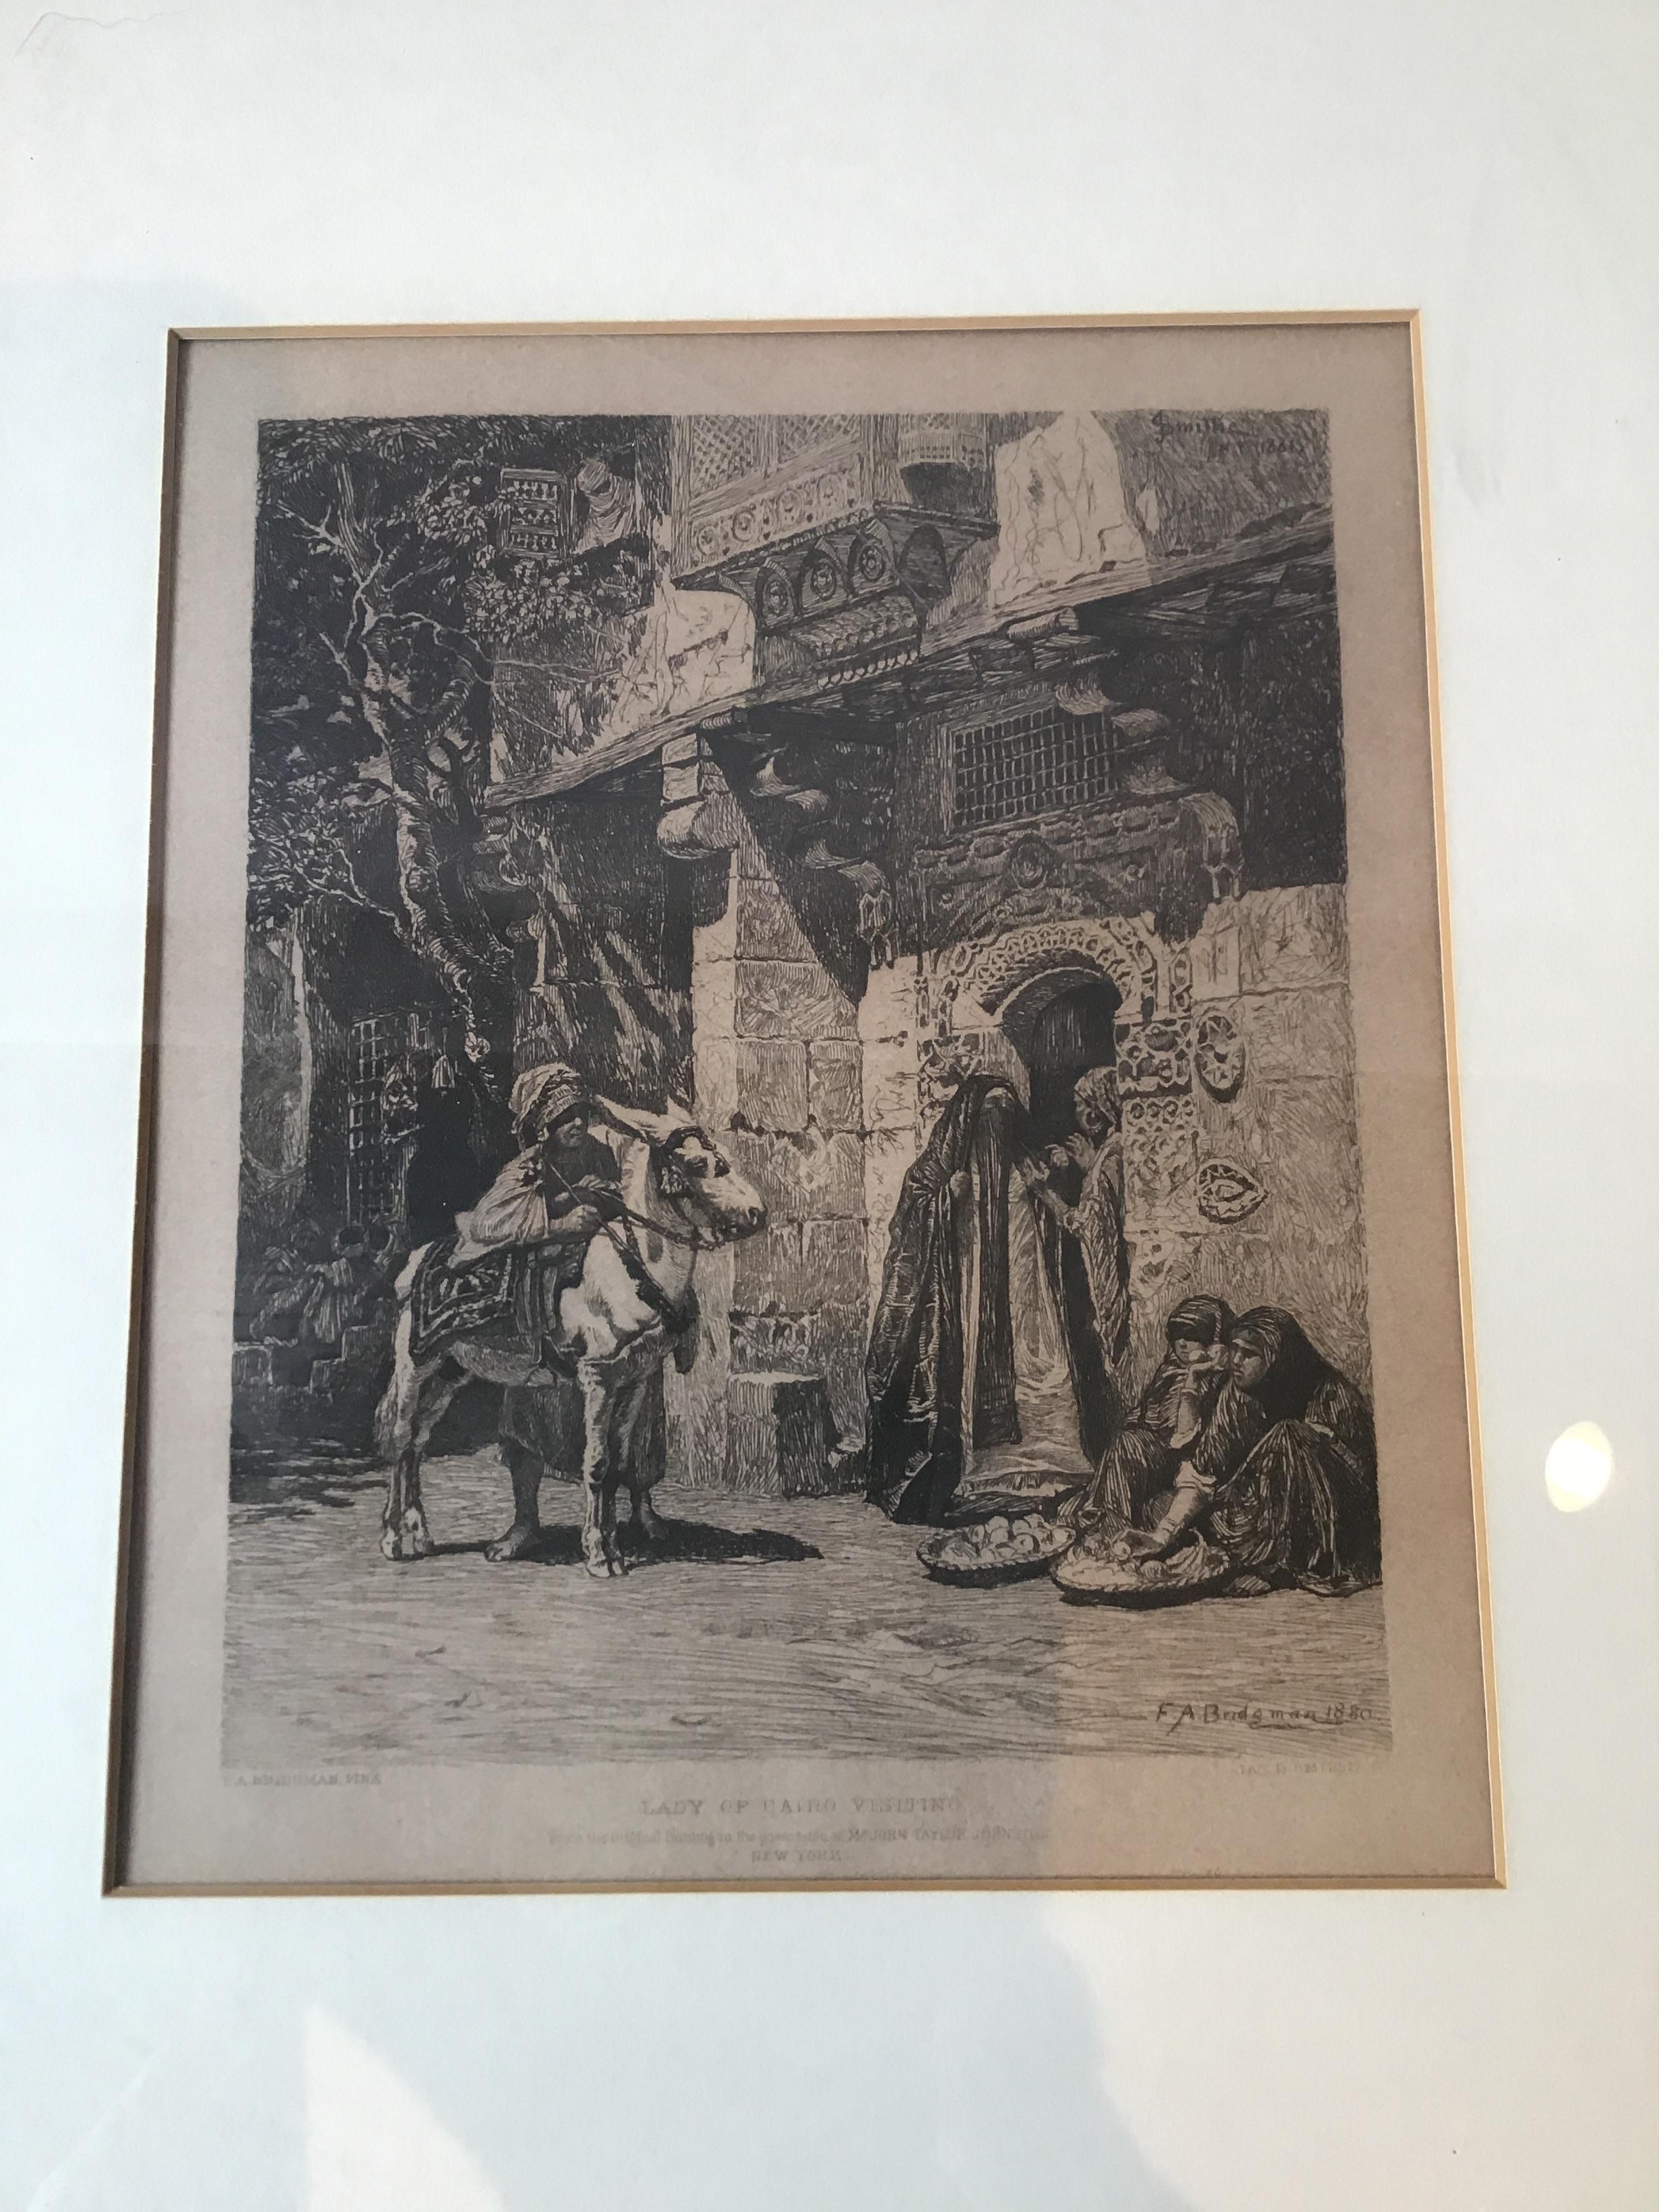 1880s F. A. Bridgman etching entitled Lady of Cairo Visiting.